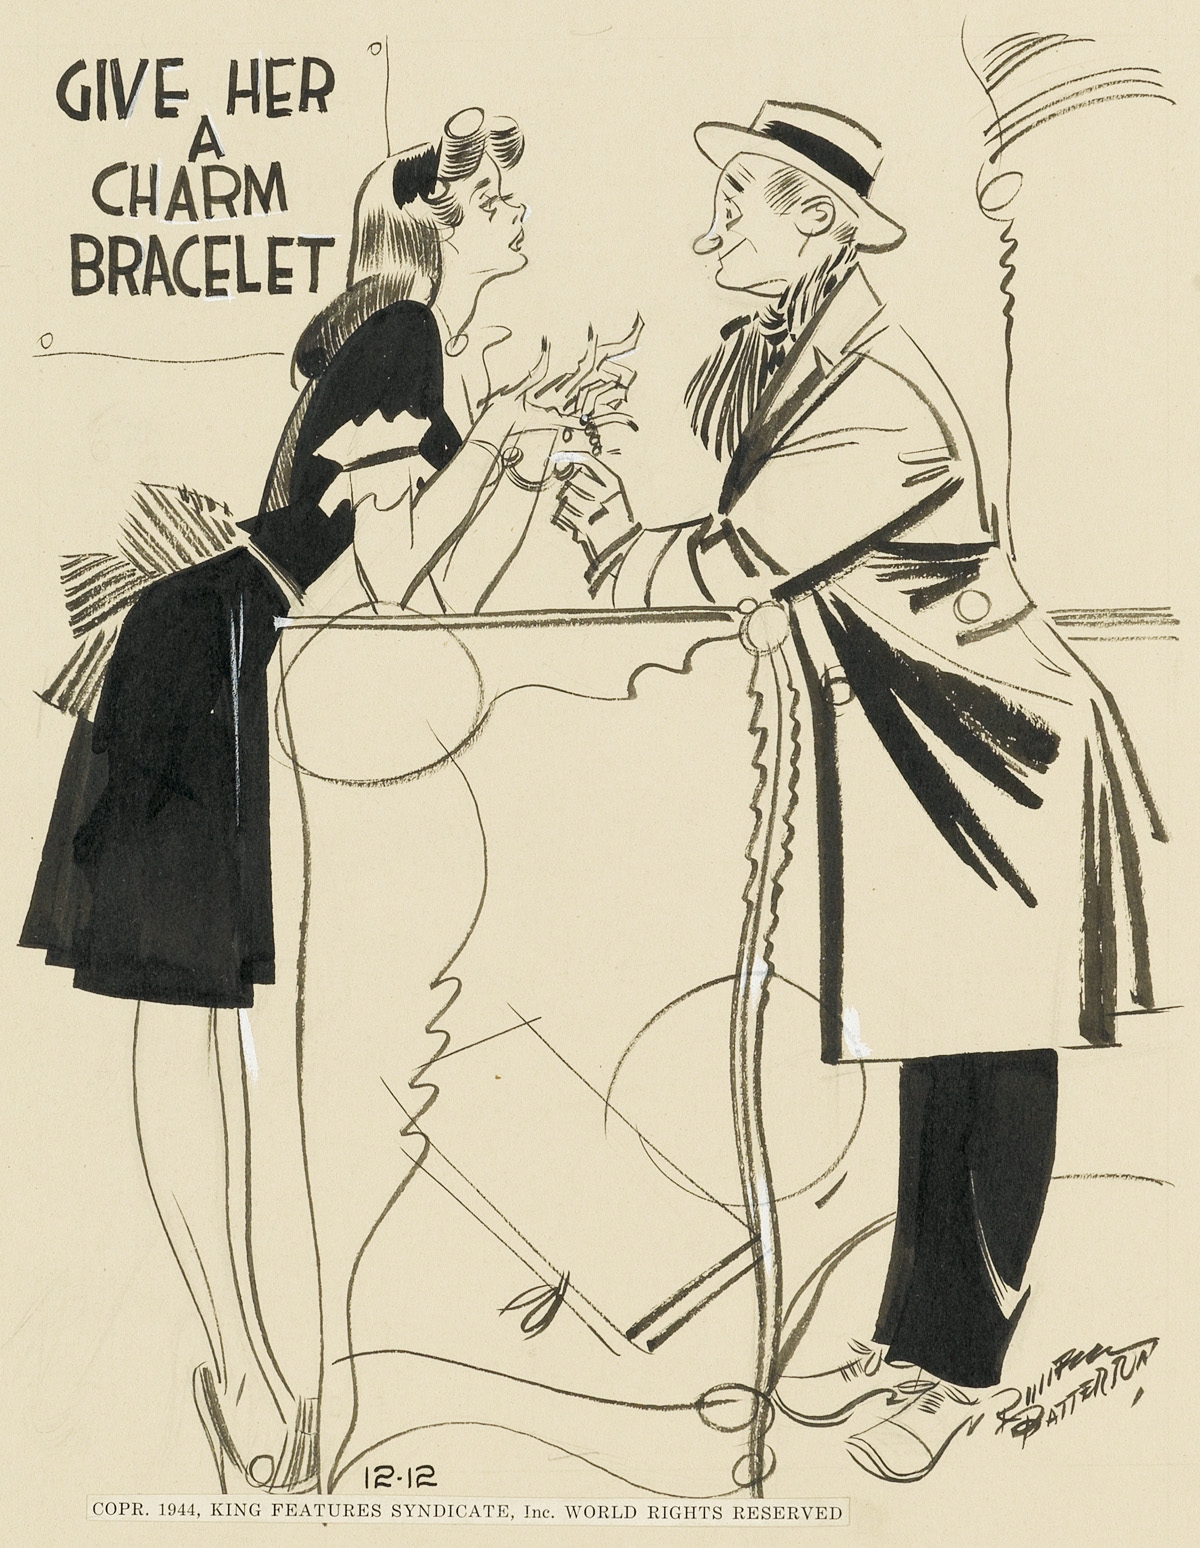 "Do you have one with little bells that'll jingle nice an' loud? It's for my girl-friend's kid sister." Original daily "Pin-Up Girls" cartoon, published by King Features Syndicate, December 12, 1944